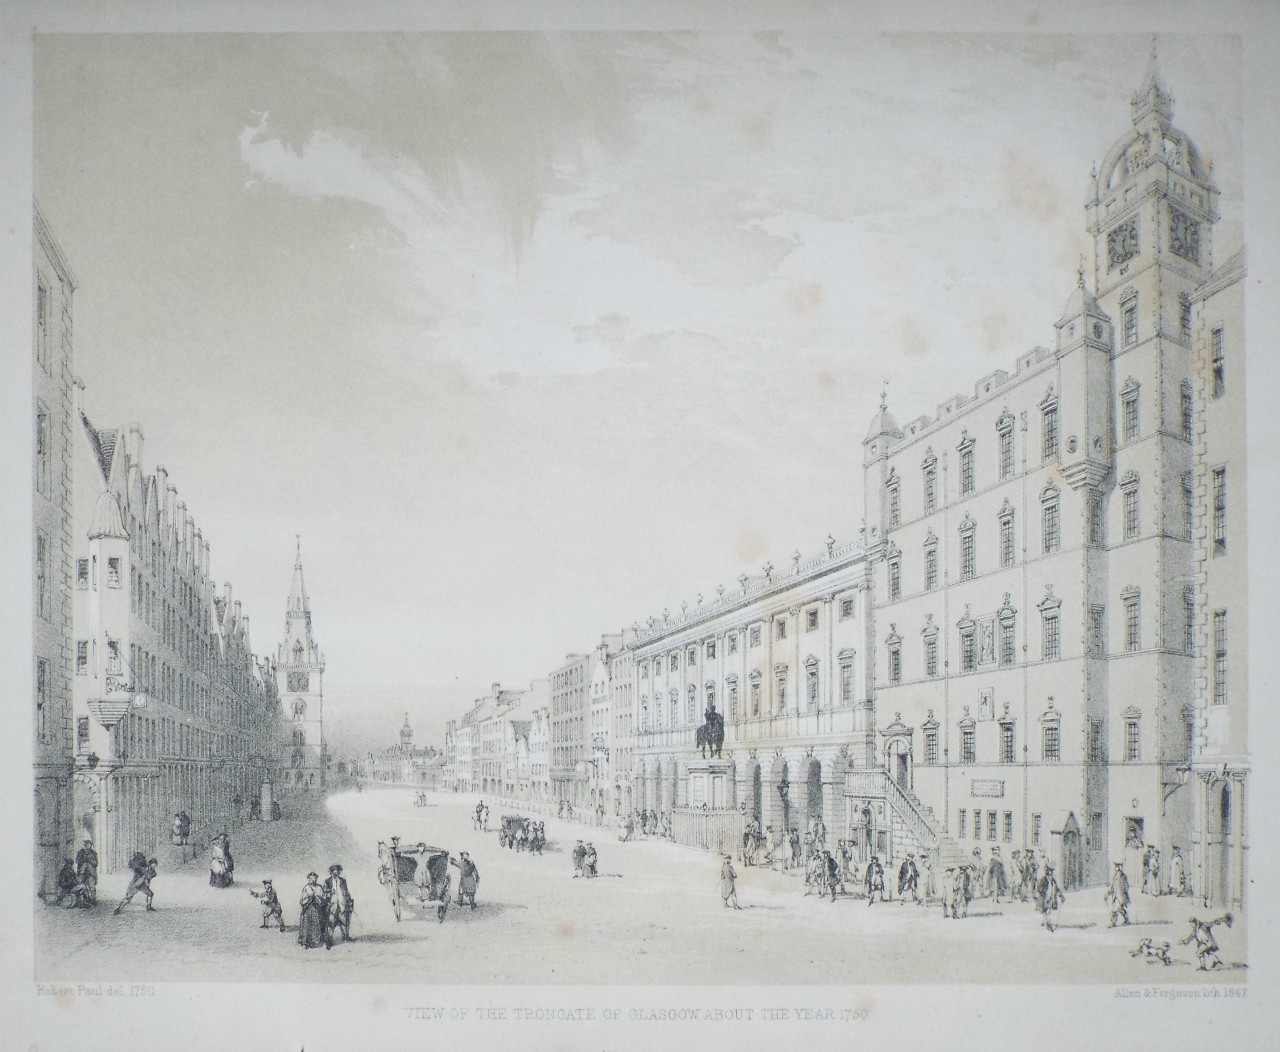 Lithograph - View of the Trongate of Glasgow about the year 1750. - Allan